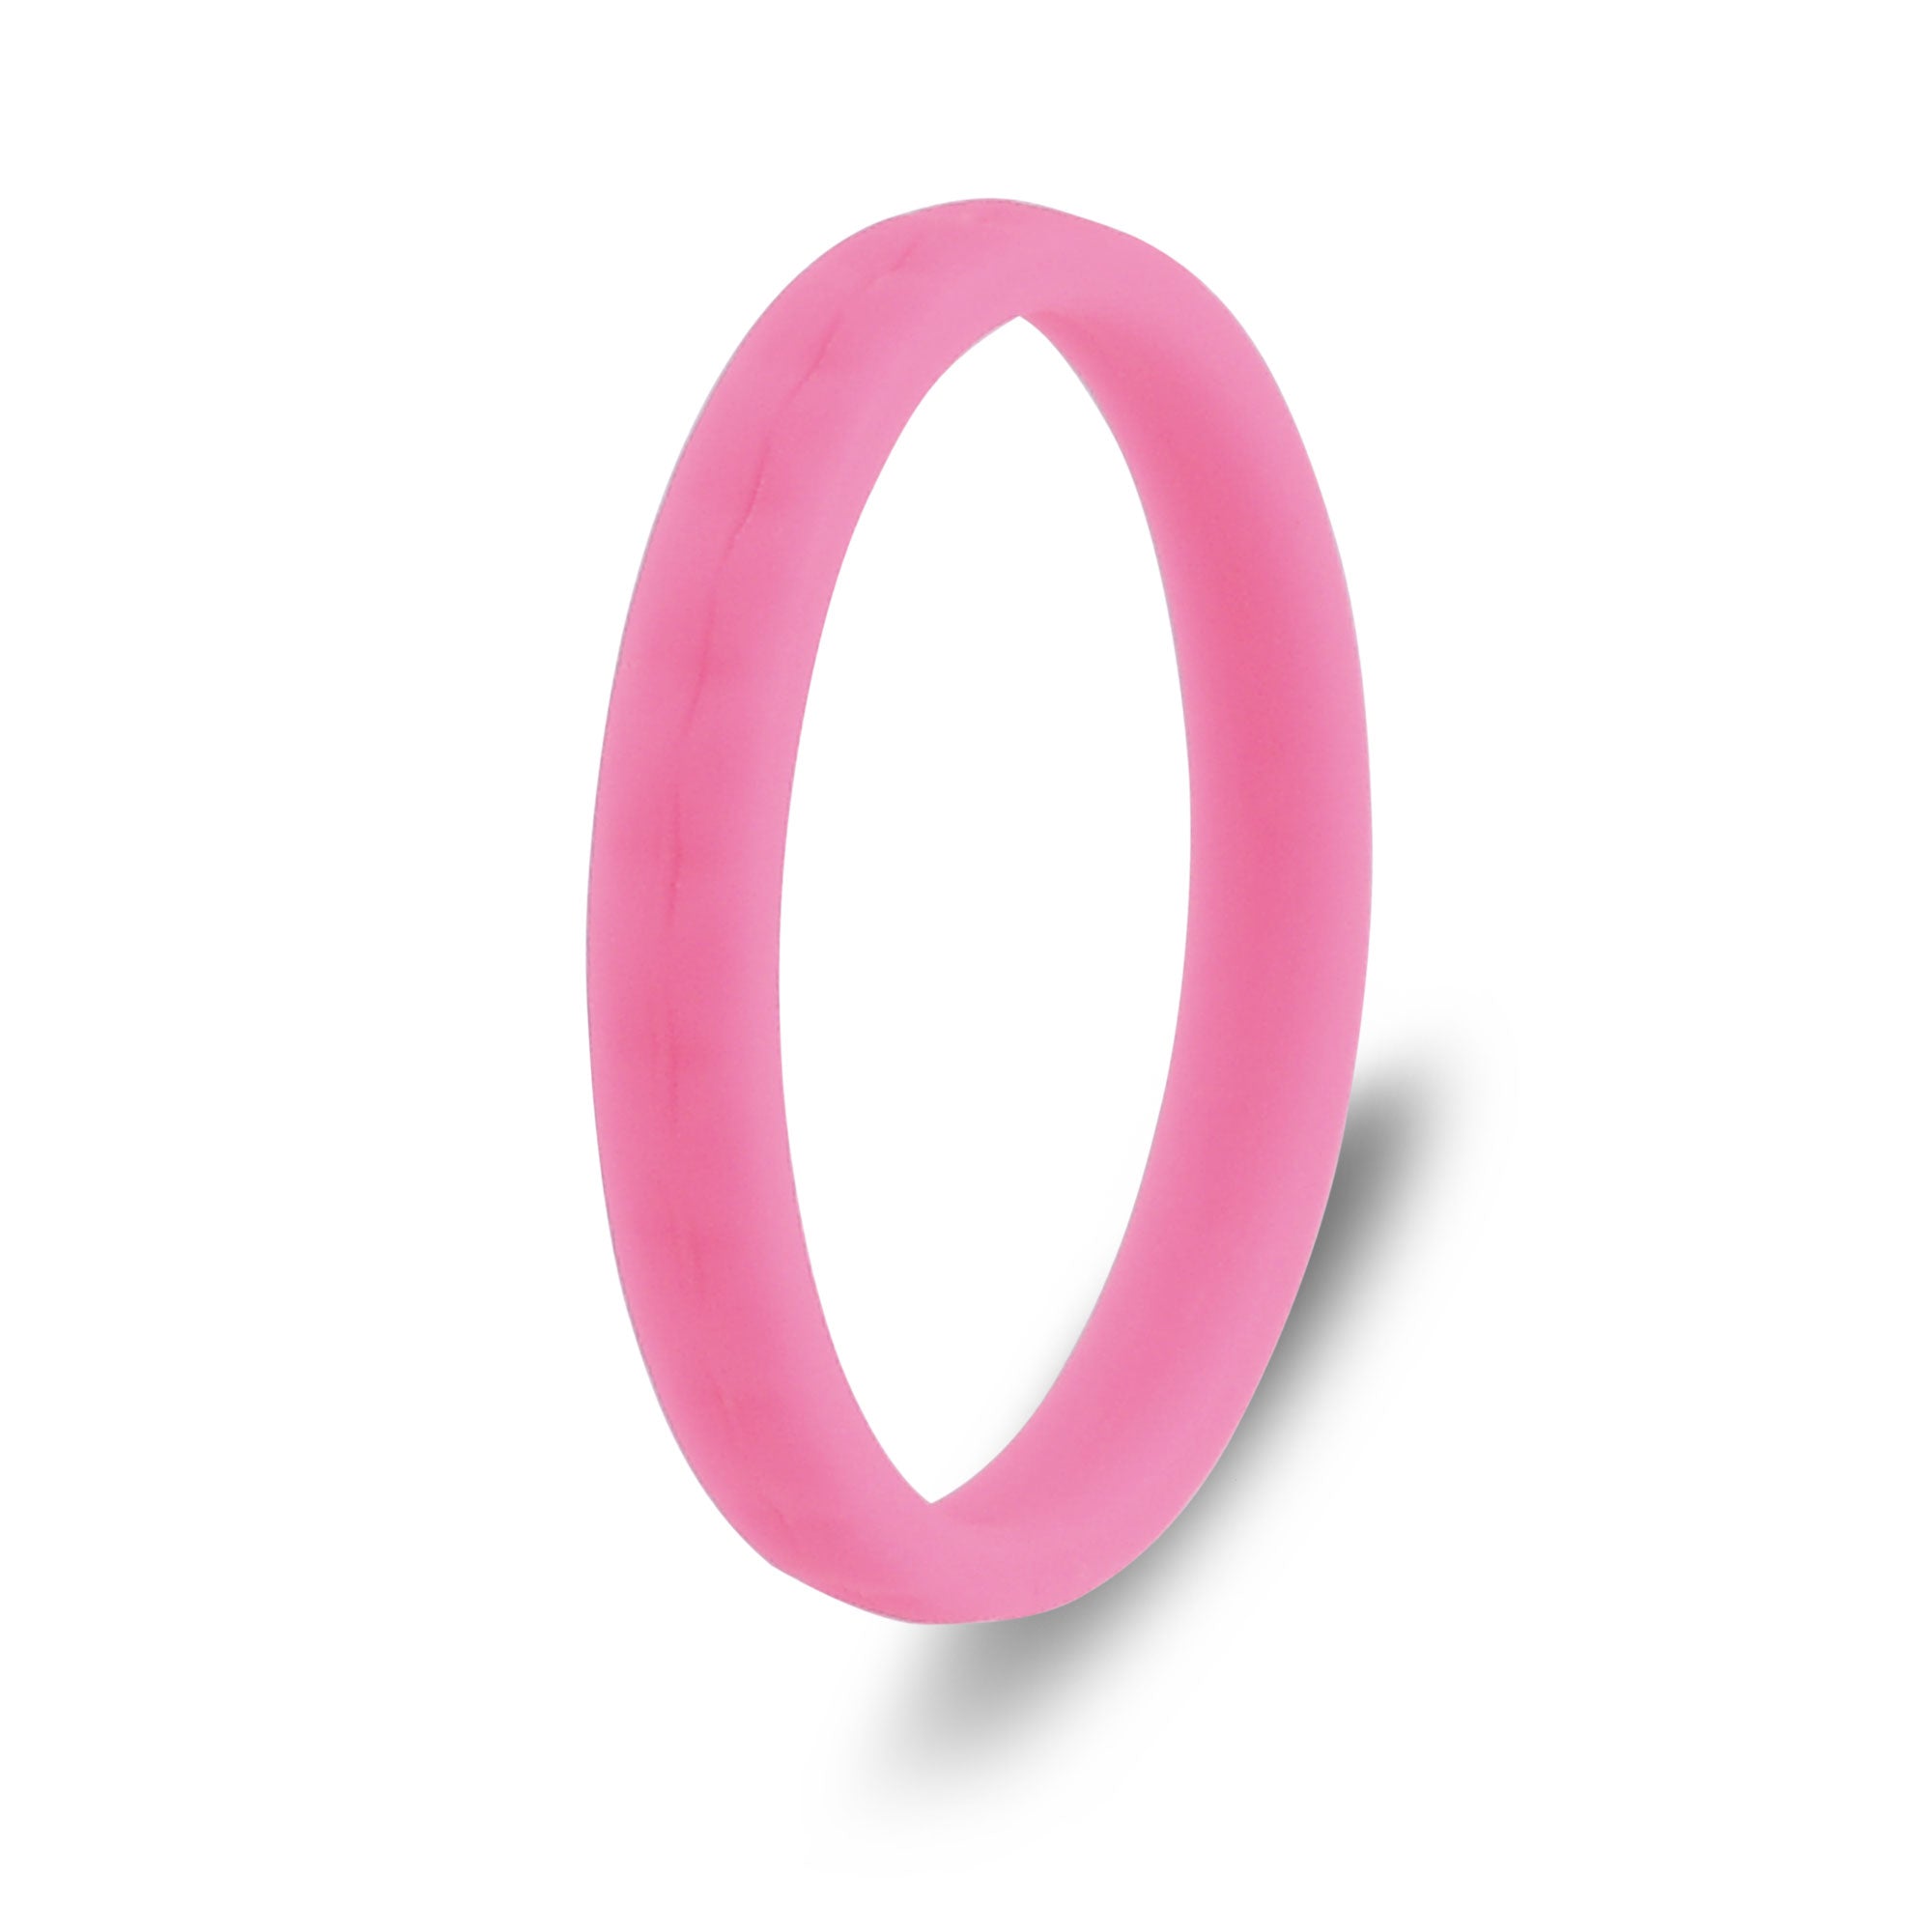 The Strawberry Sorbet - Silicone Ring